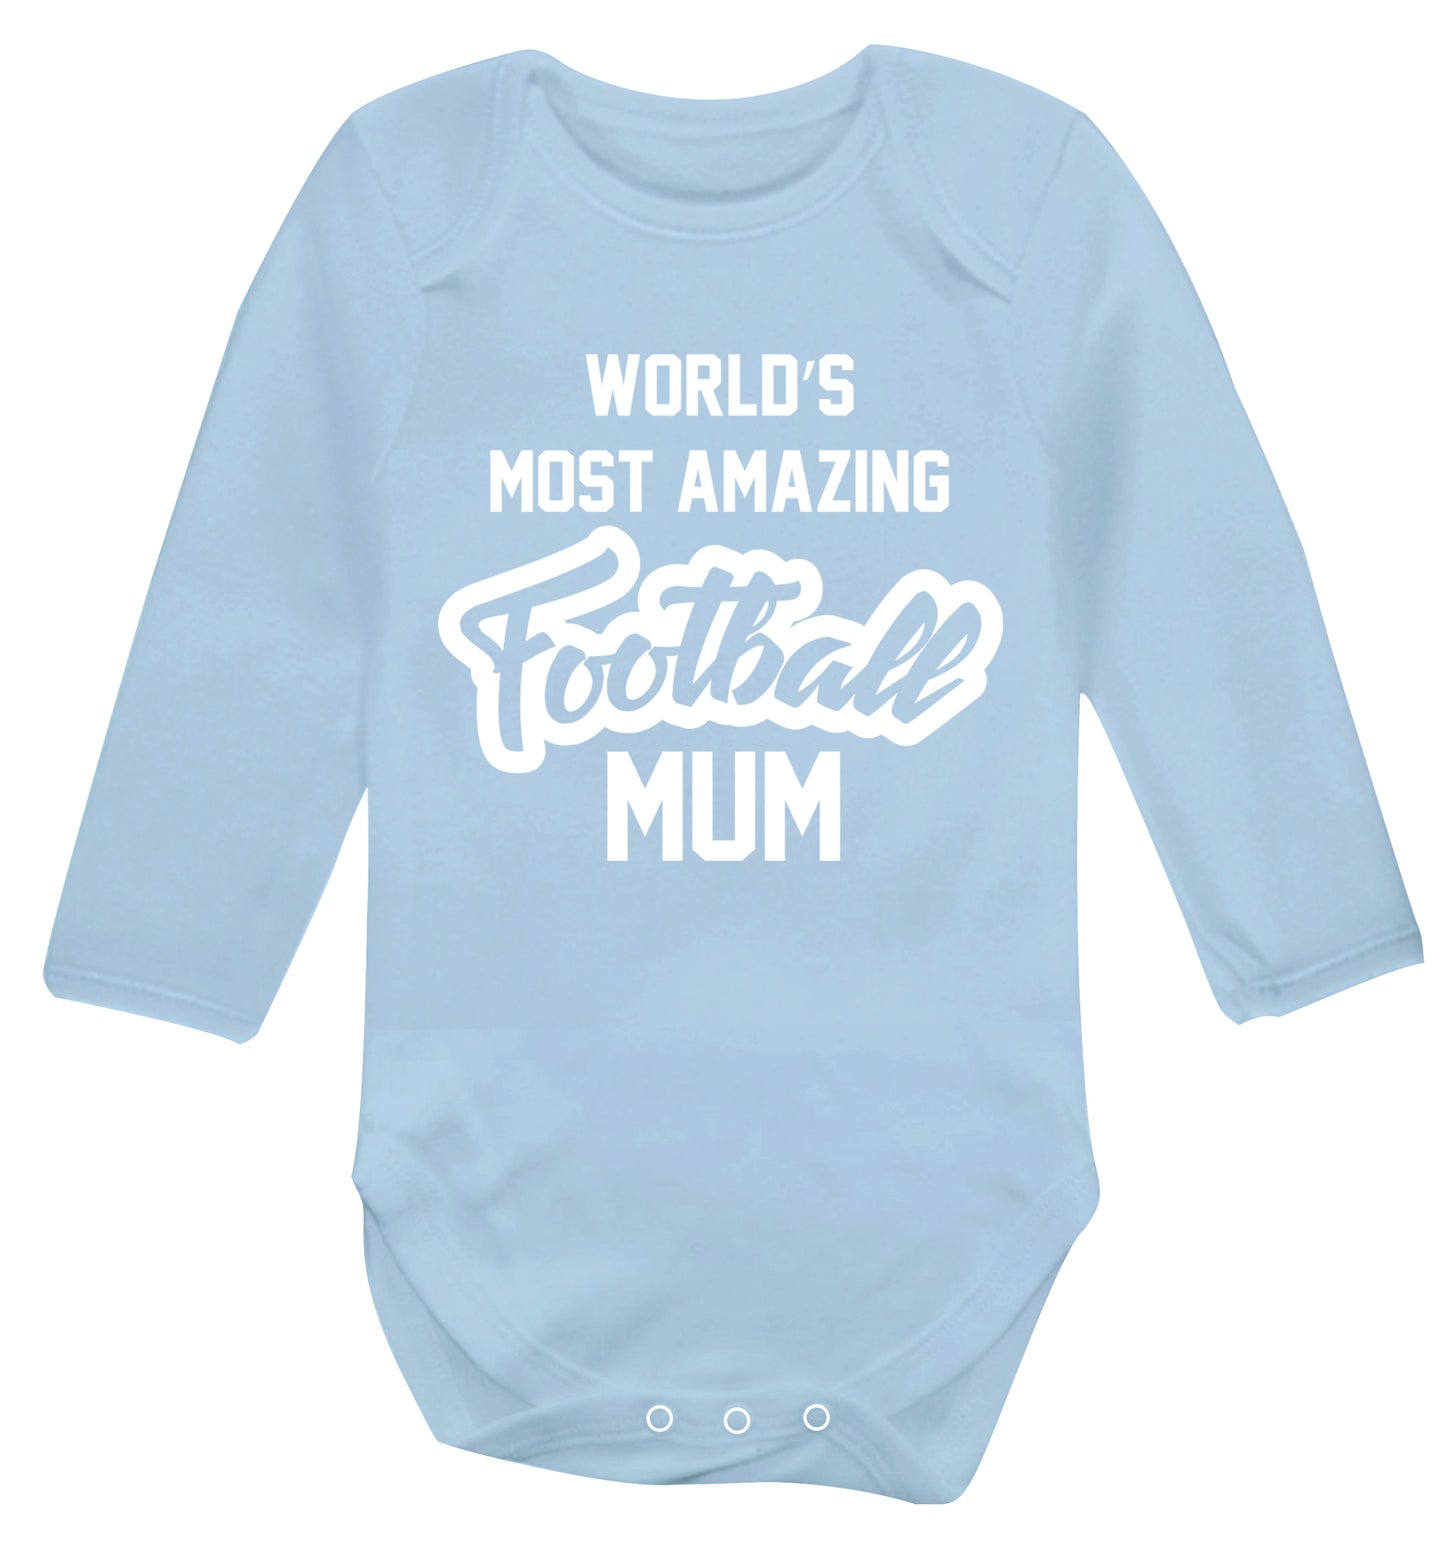 Worlds most amazing football mum Baby Vest long sleeved pale blue 6-12 months